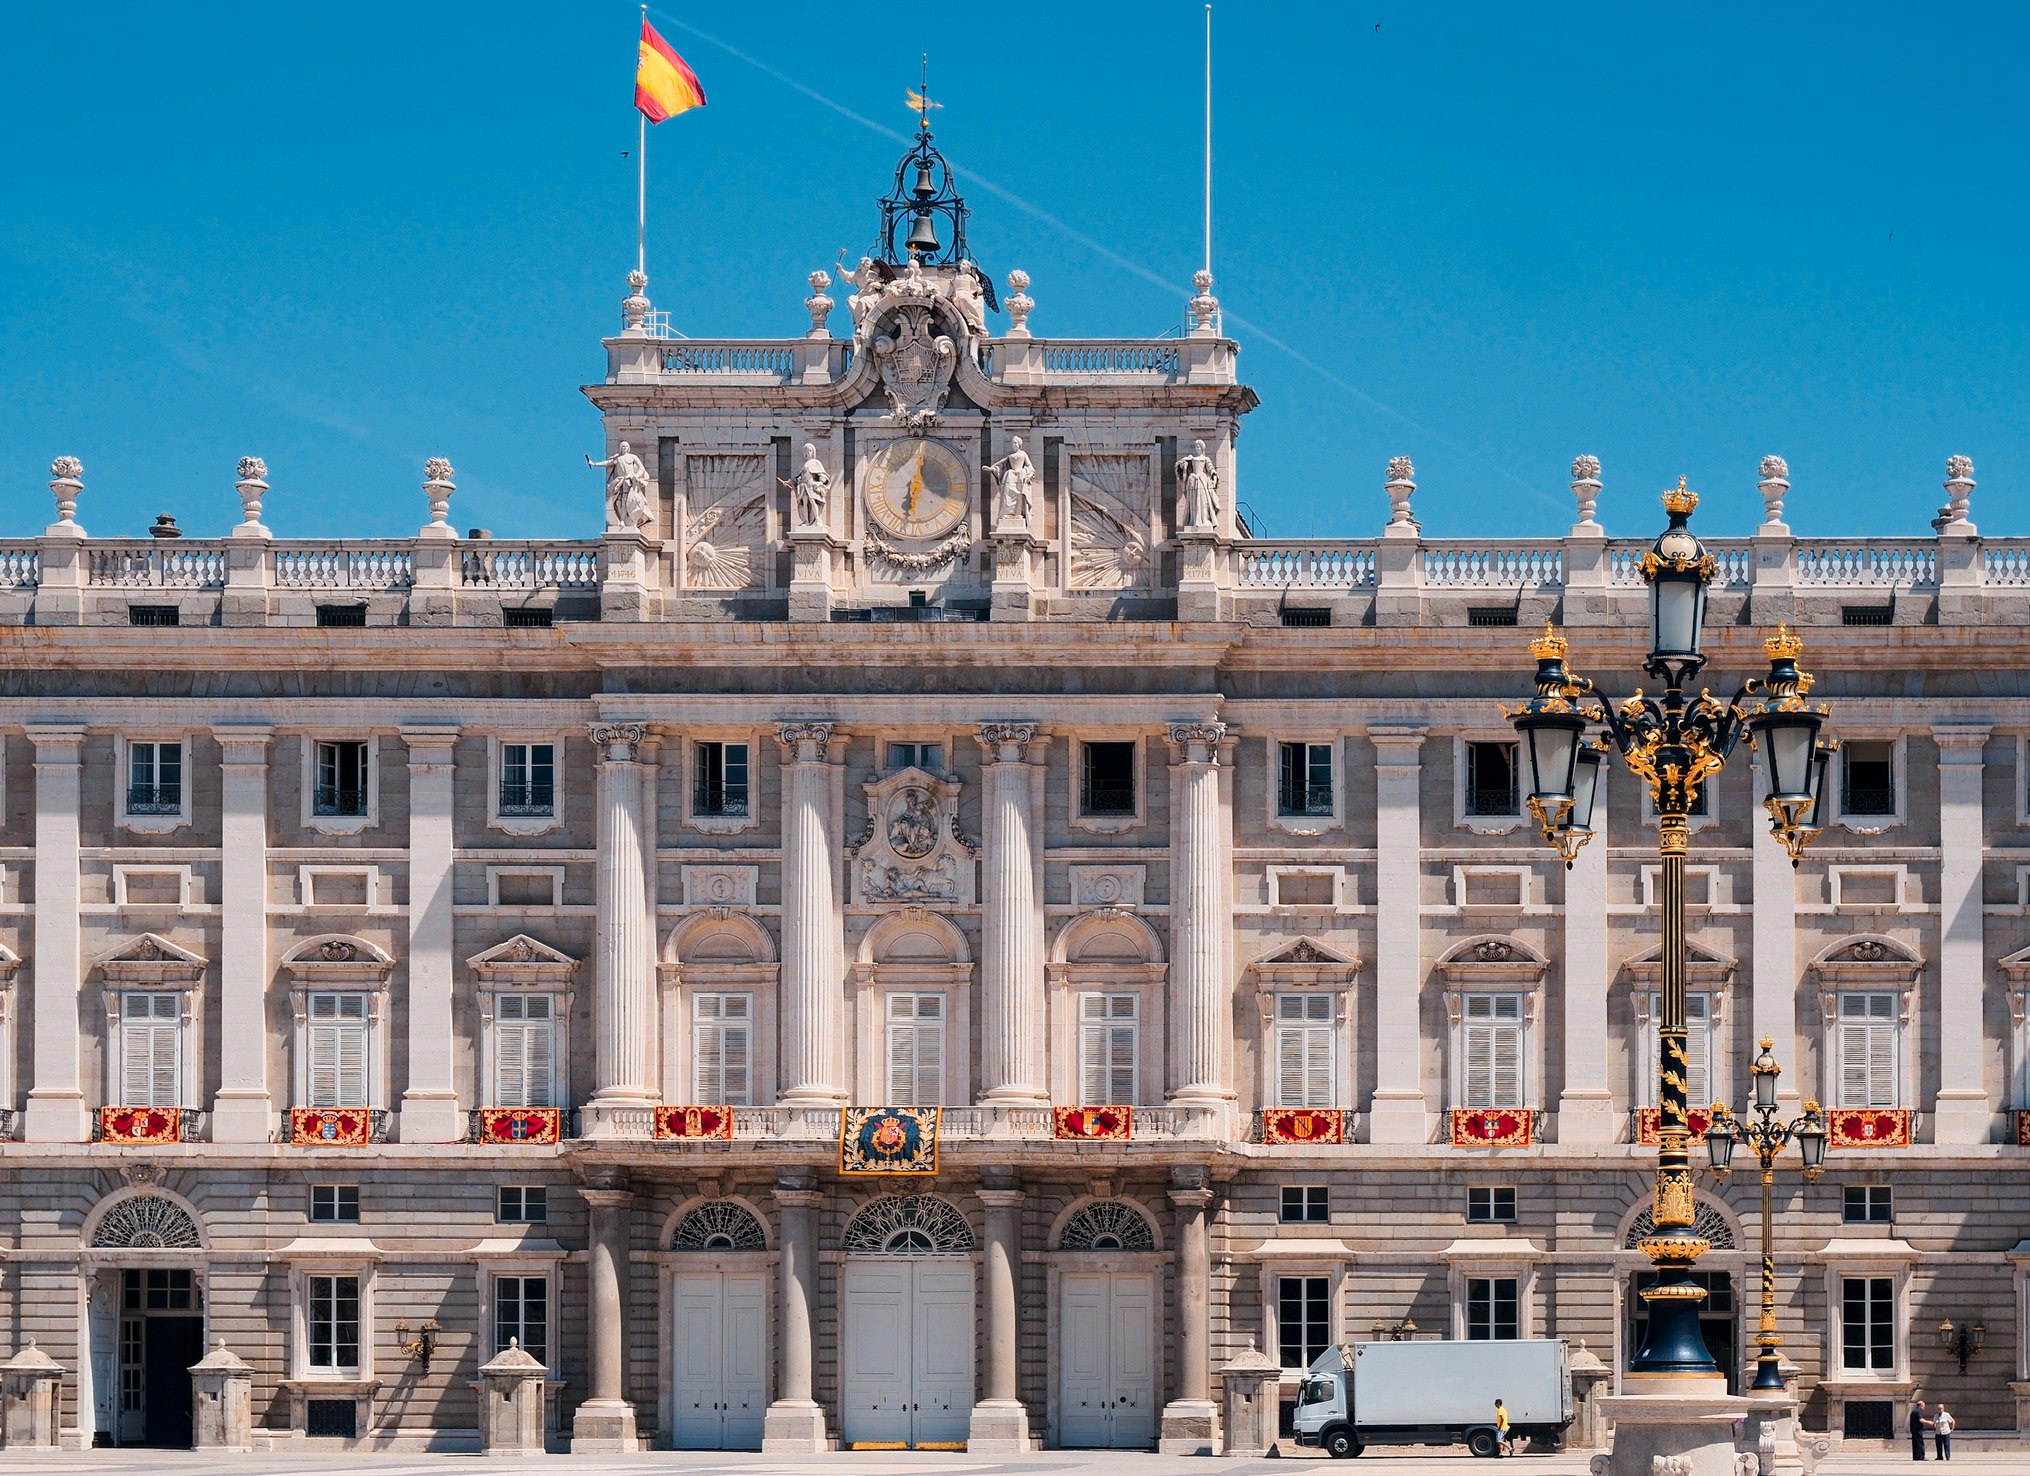 An up-close view of the Royal Palace or Palacio Real in Madrid on a cloudless day